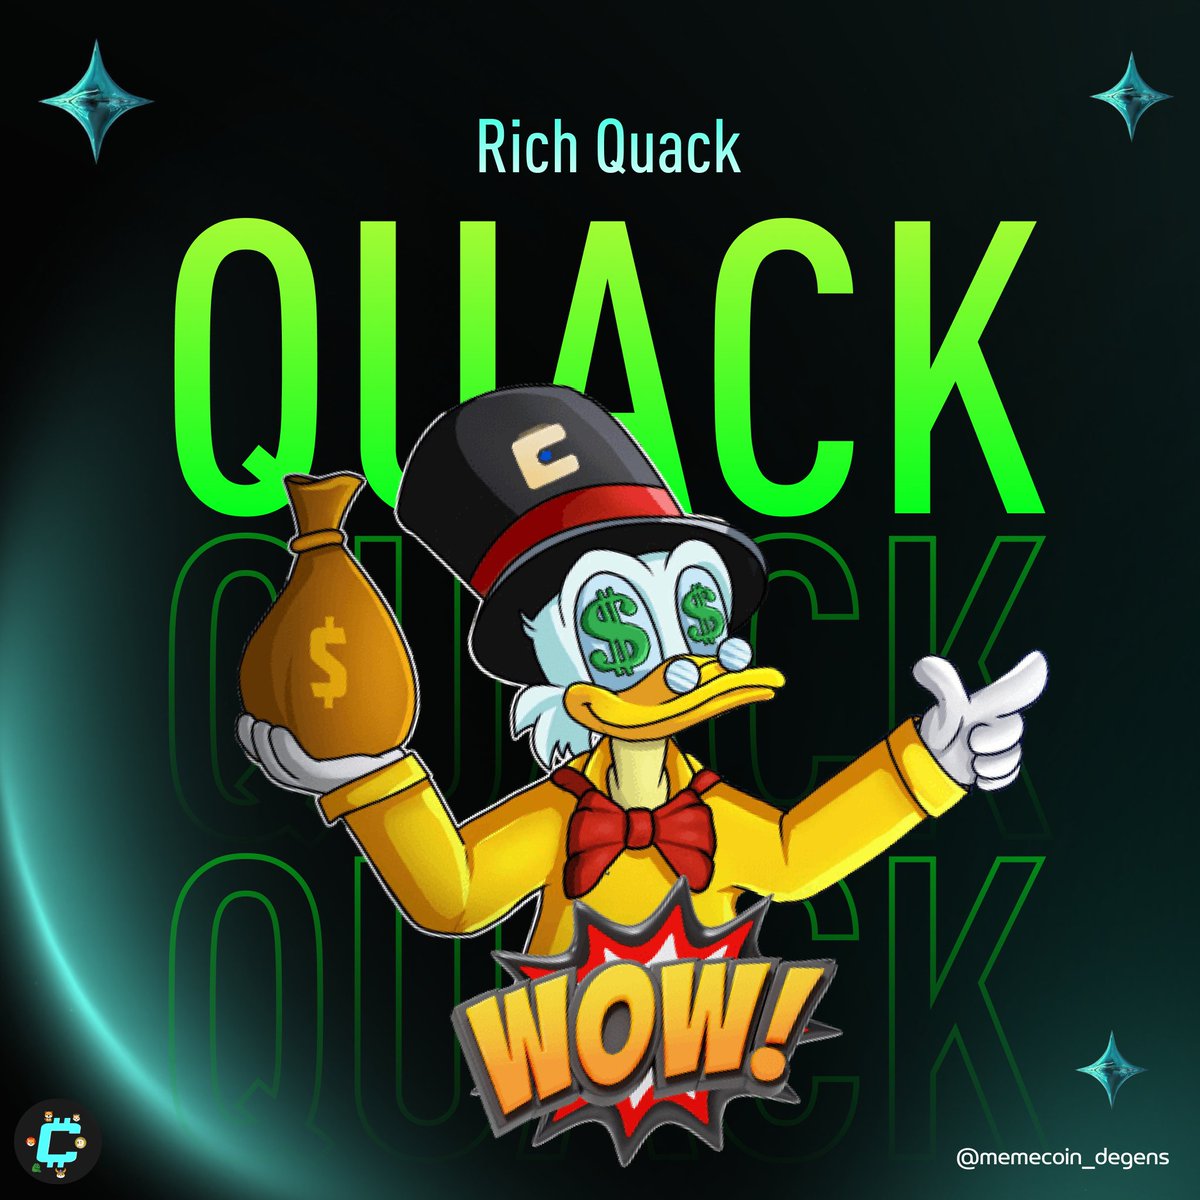 📢 New Listing - $QUACK @richquack will be listed on @bitgetglobal with 4,000,000,000,000 $QUACK up for grabs! 🔹Deposit: opened 🔹Trading starts: April 12, 11:00 AM (UTC)